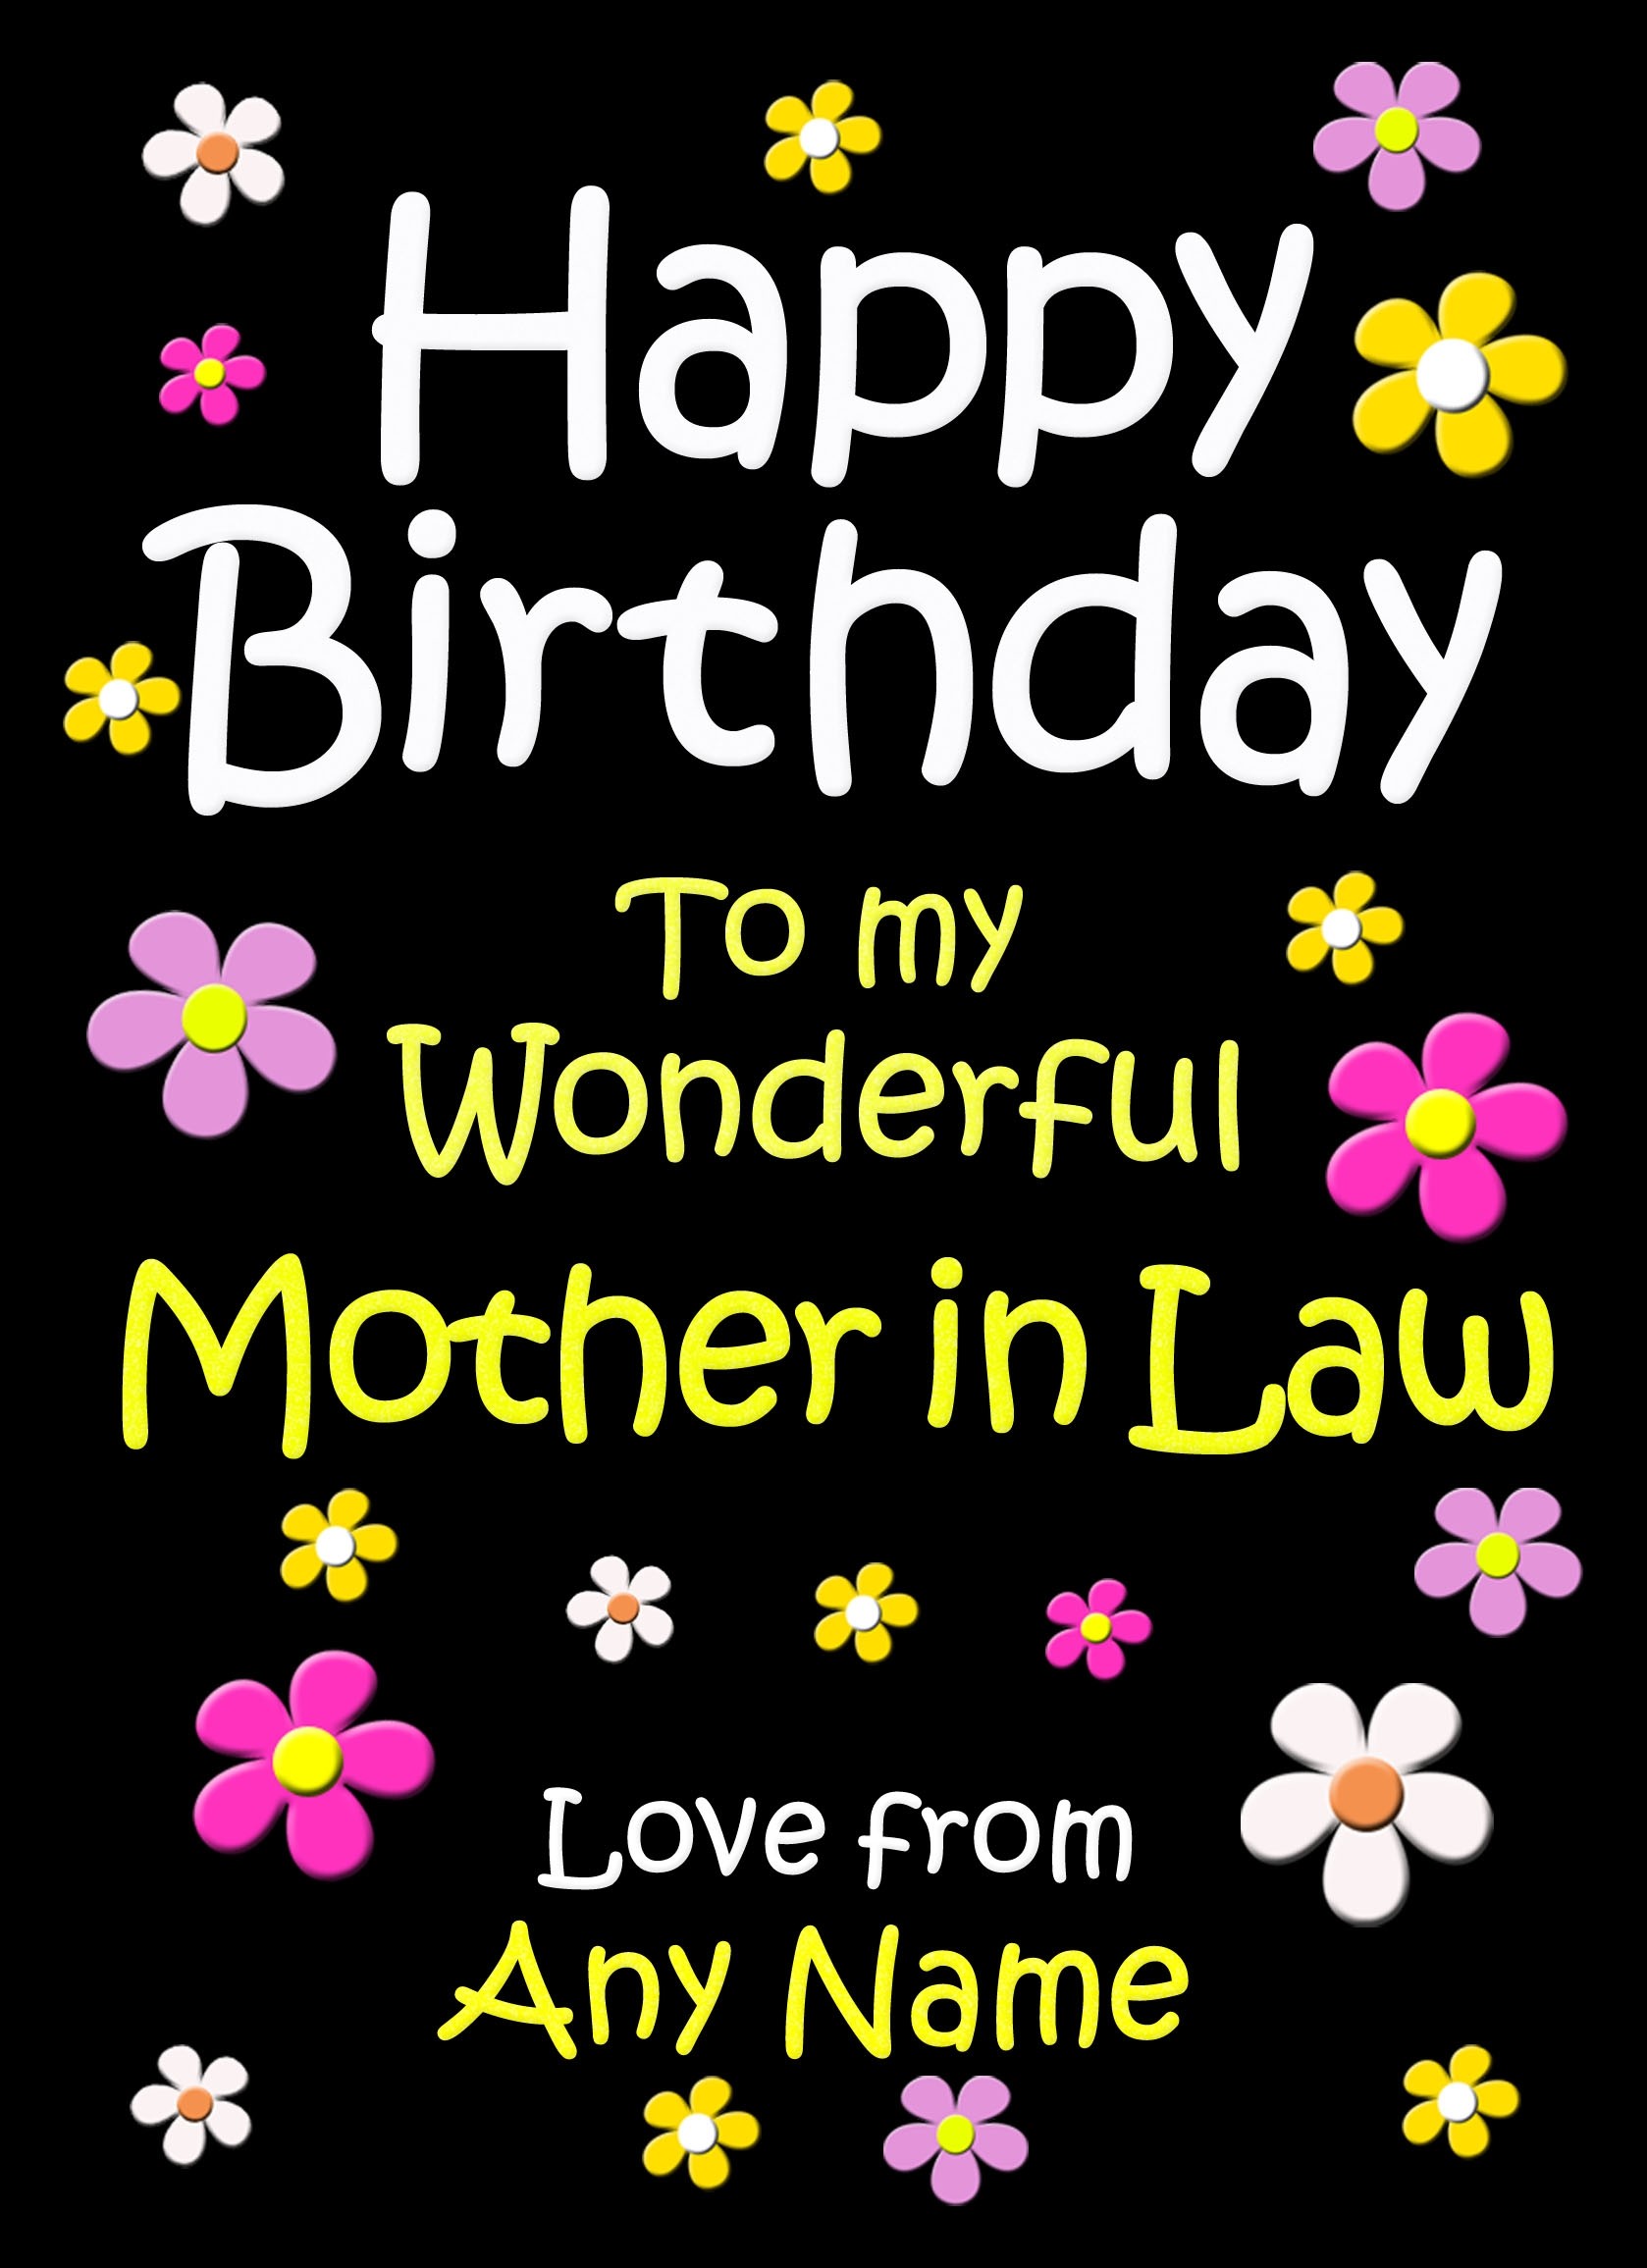 Personalised Mother in Law Birthday Card (Black)